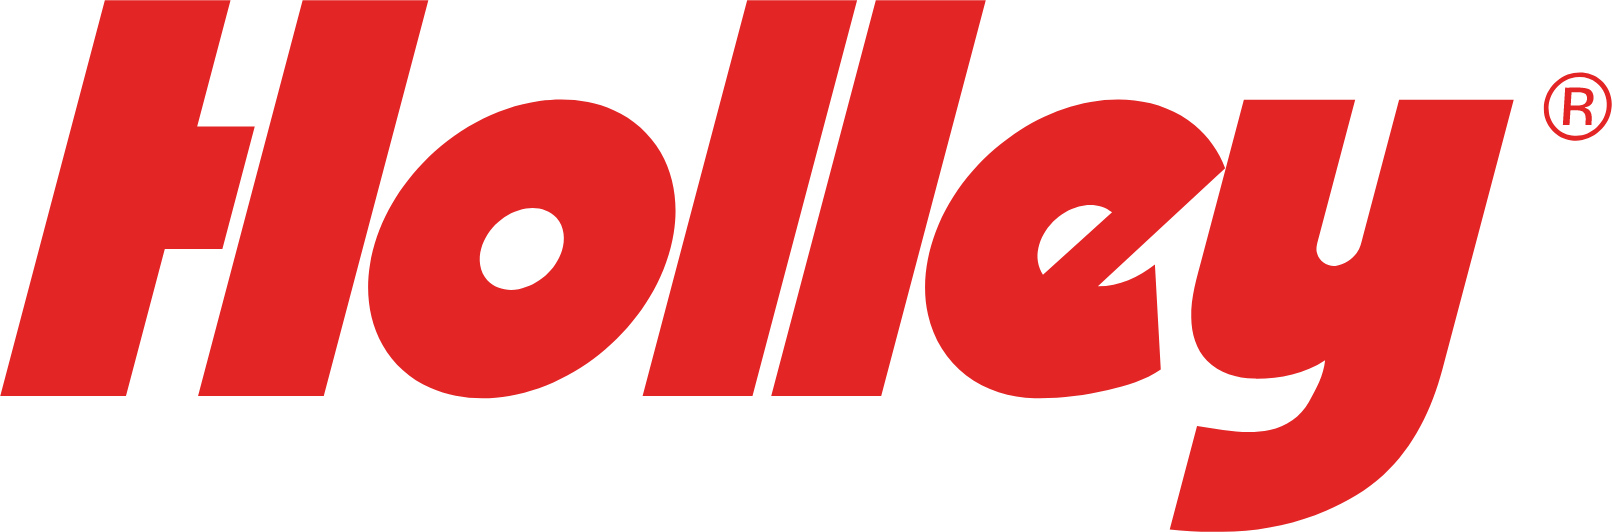 Holley logo in transparent PNG and vectorized SVG formats